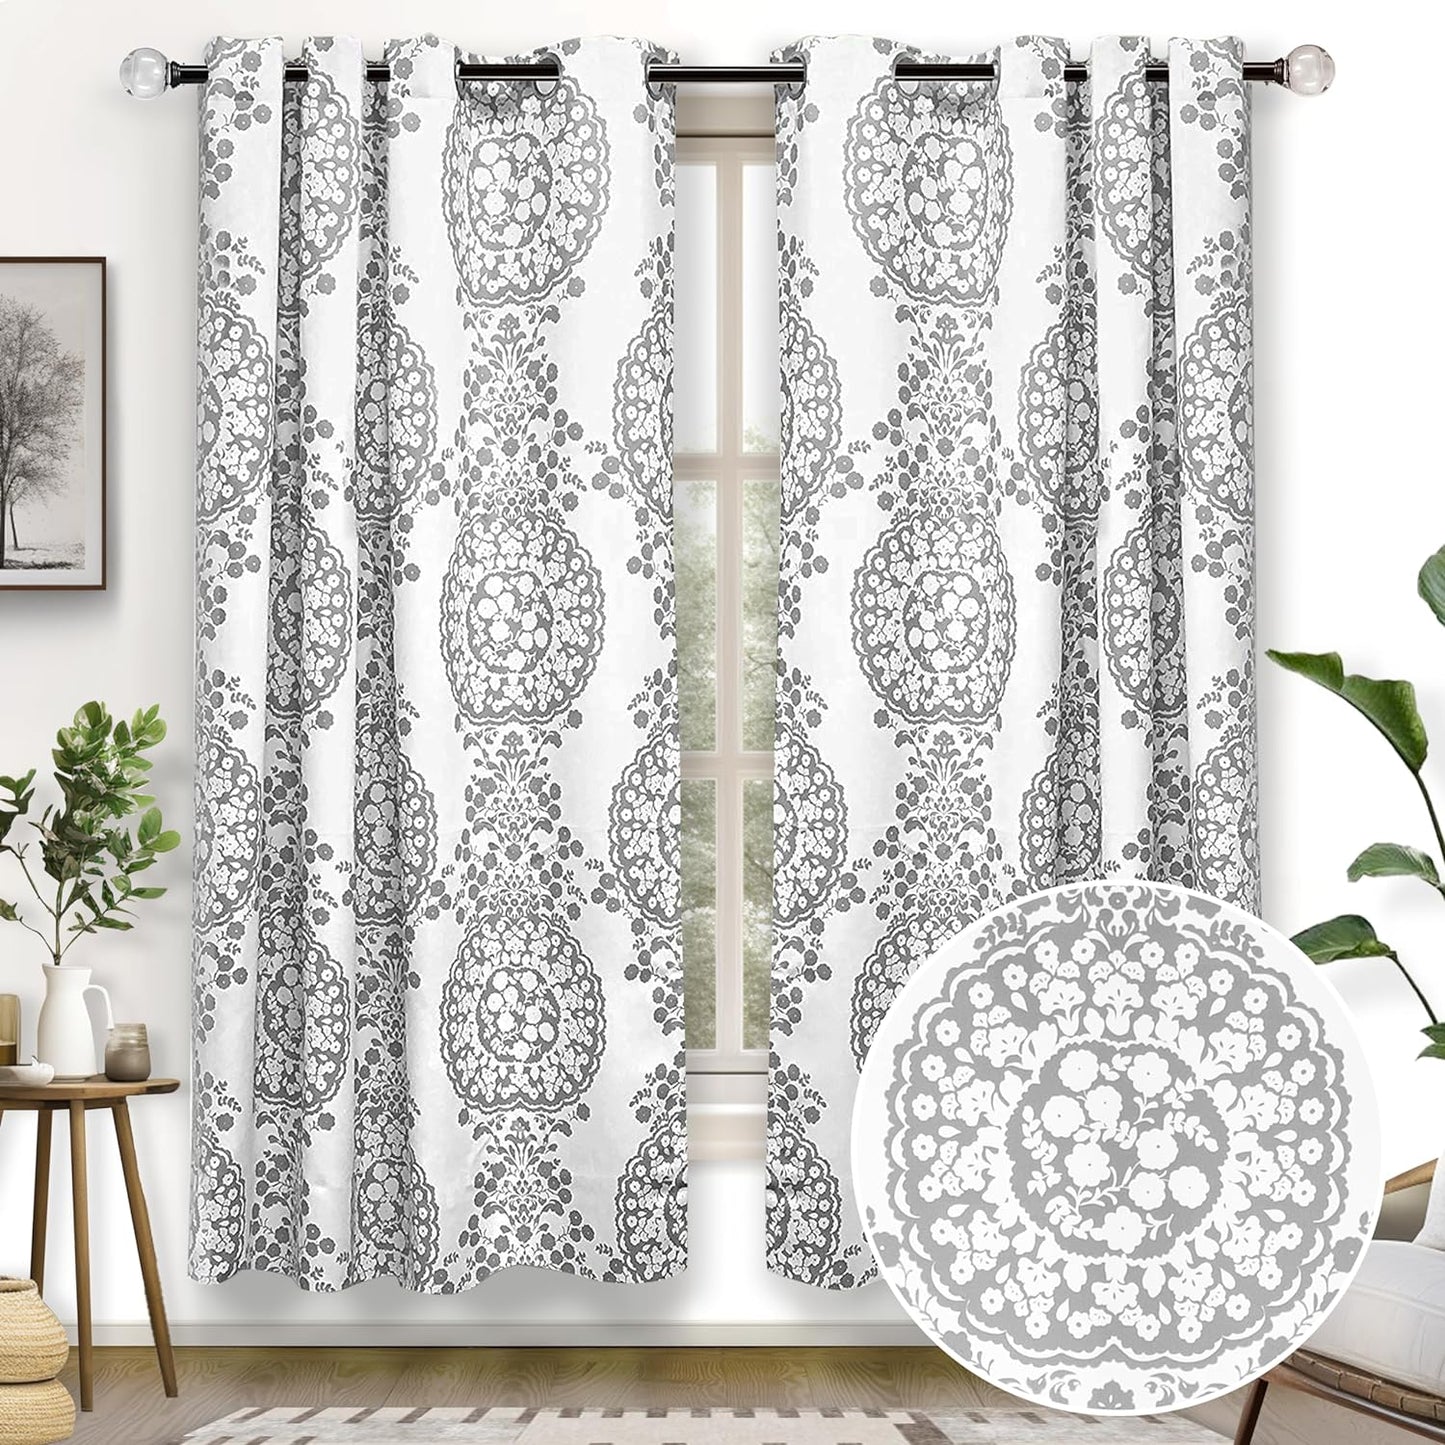 Driftaway Damask Curtains for Kitchen Bathroom Laundry Room Small Windows Floral Damask Medallion Patterned Adjustable Tie up Curtain Single 45 Inch by 63 Inch Dusty Blue  DriftAway Grey (15)52"X63"(Curtains) 